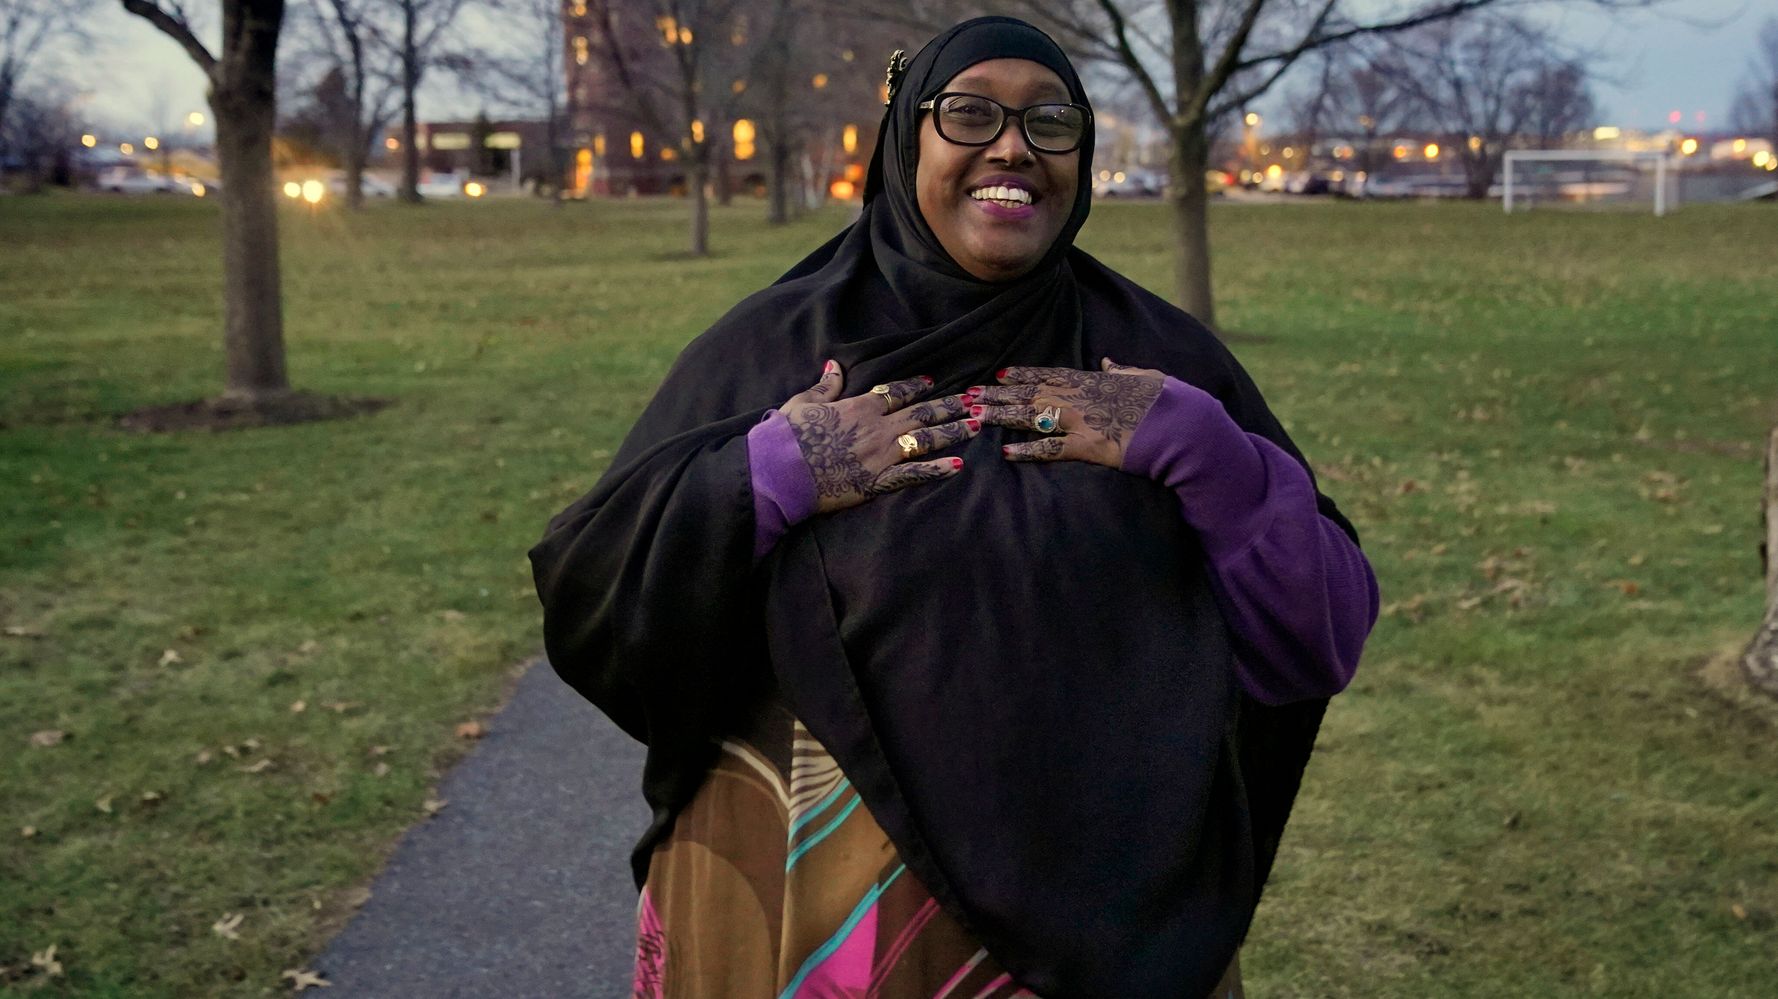 'Amazing Feeling': First Somali Mayor In U.S. Shares Her Vision | HuffPost Latest News